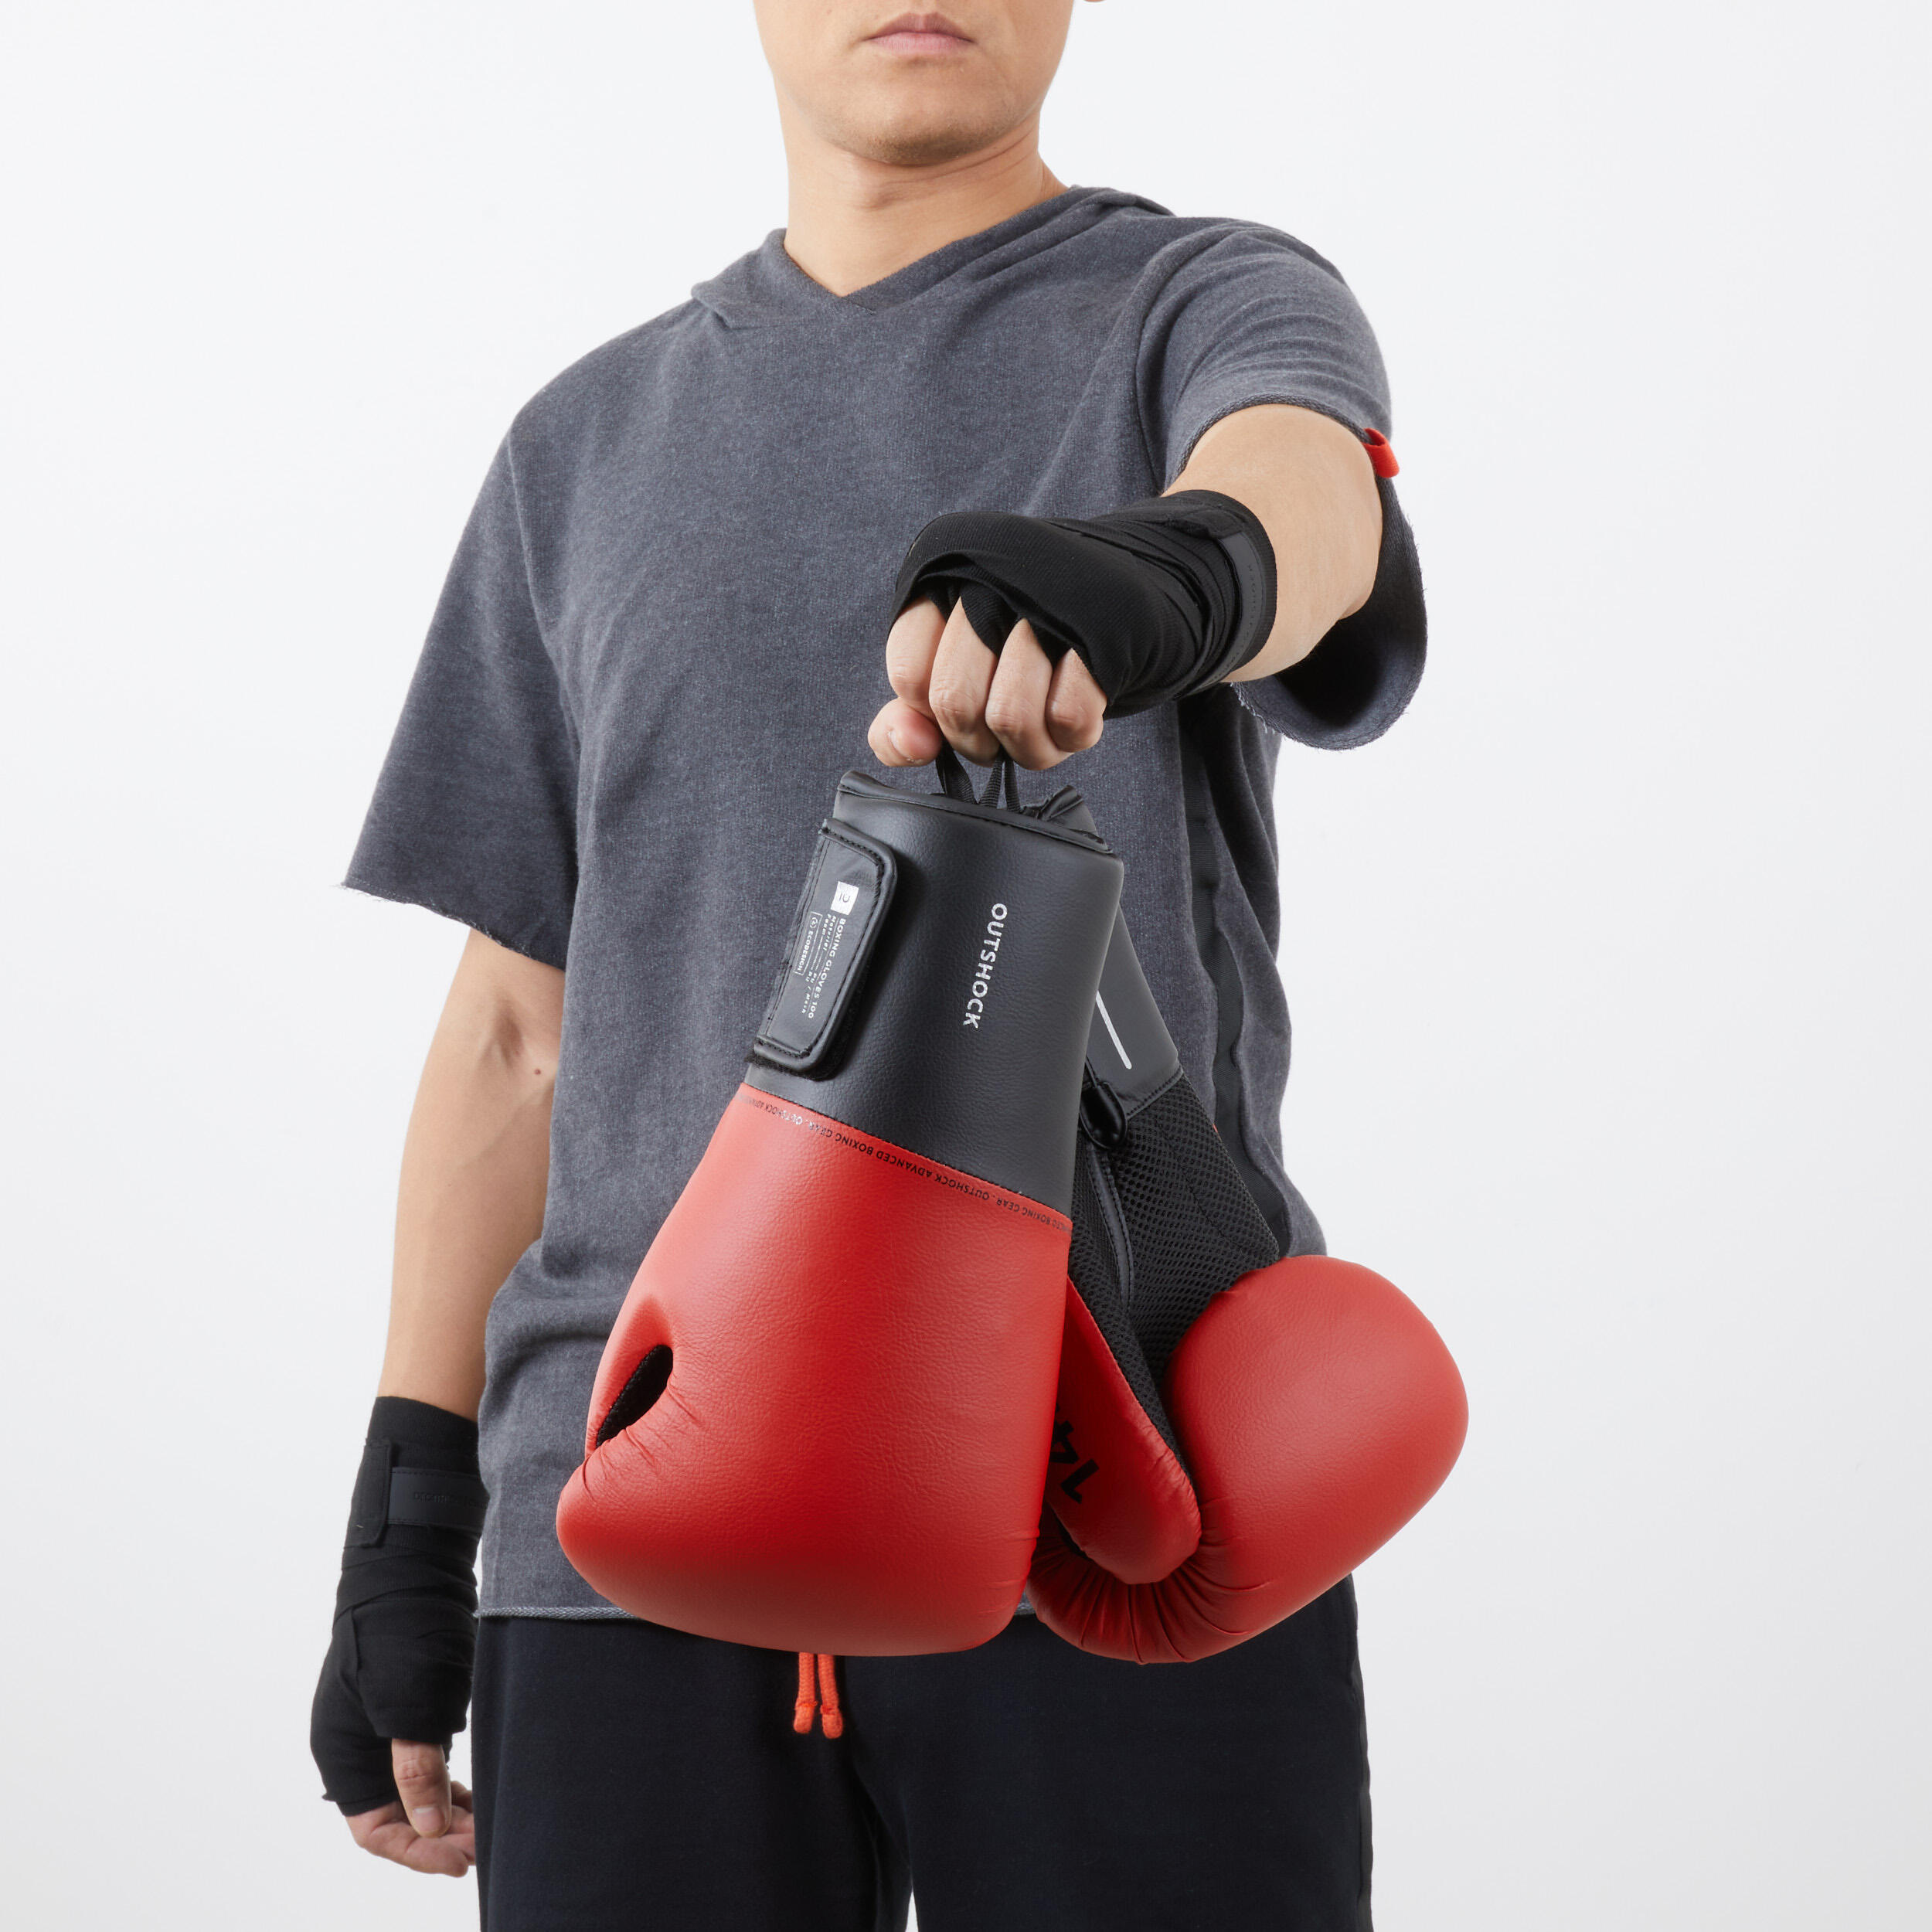 Boxing Gloves 100 - Red 5/8